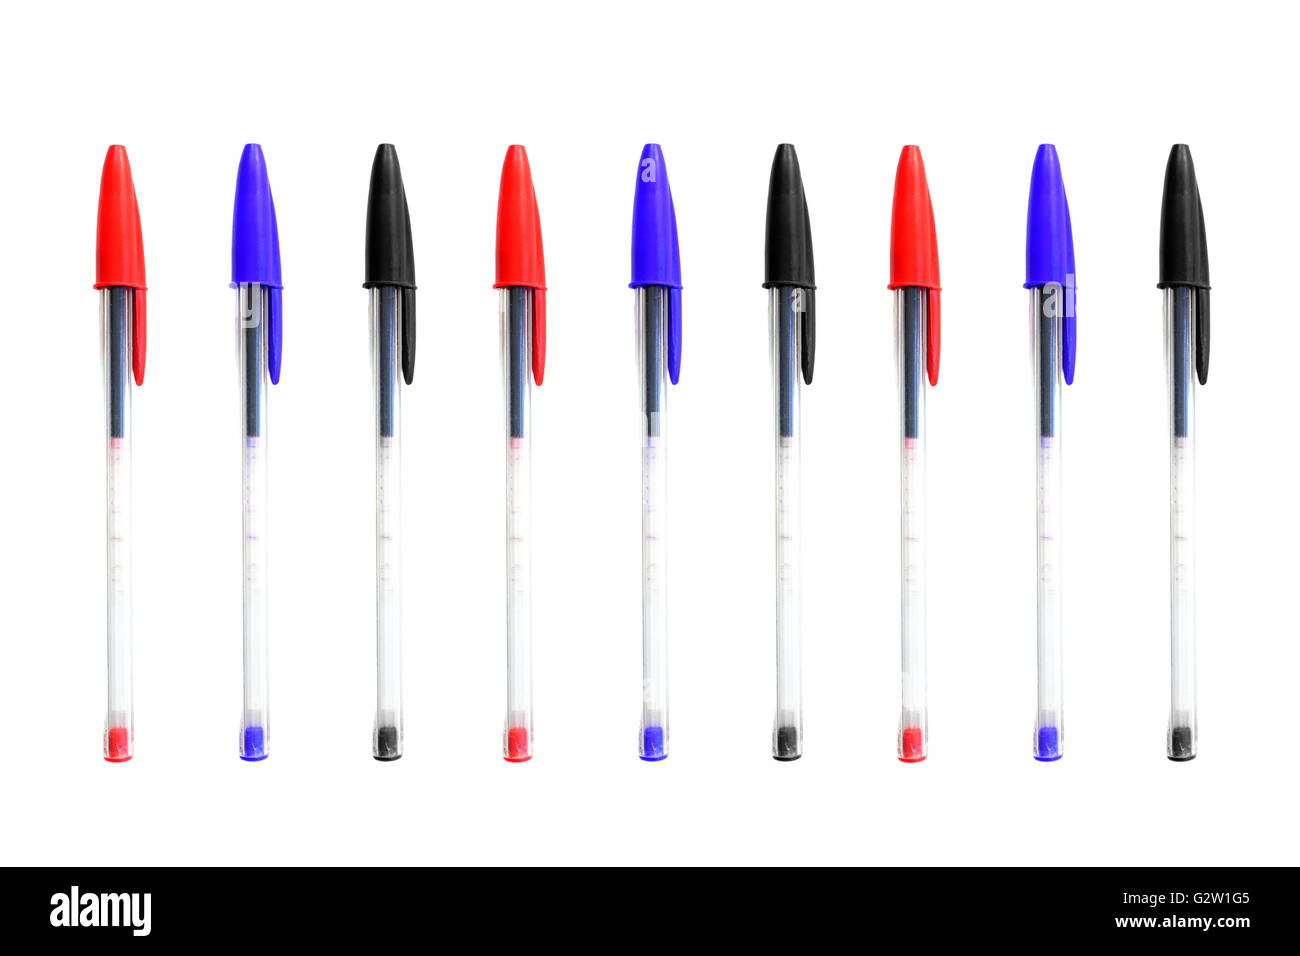 Red, Black and Blue pens photographed against a white background. Stock Photo